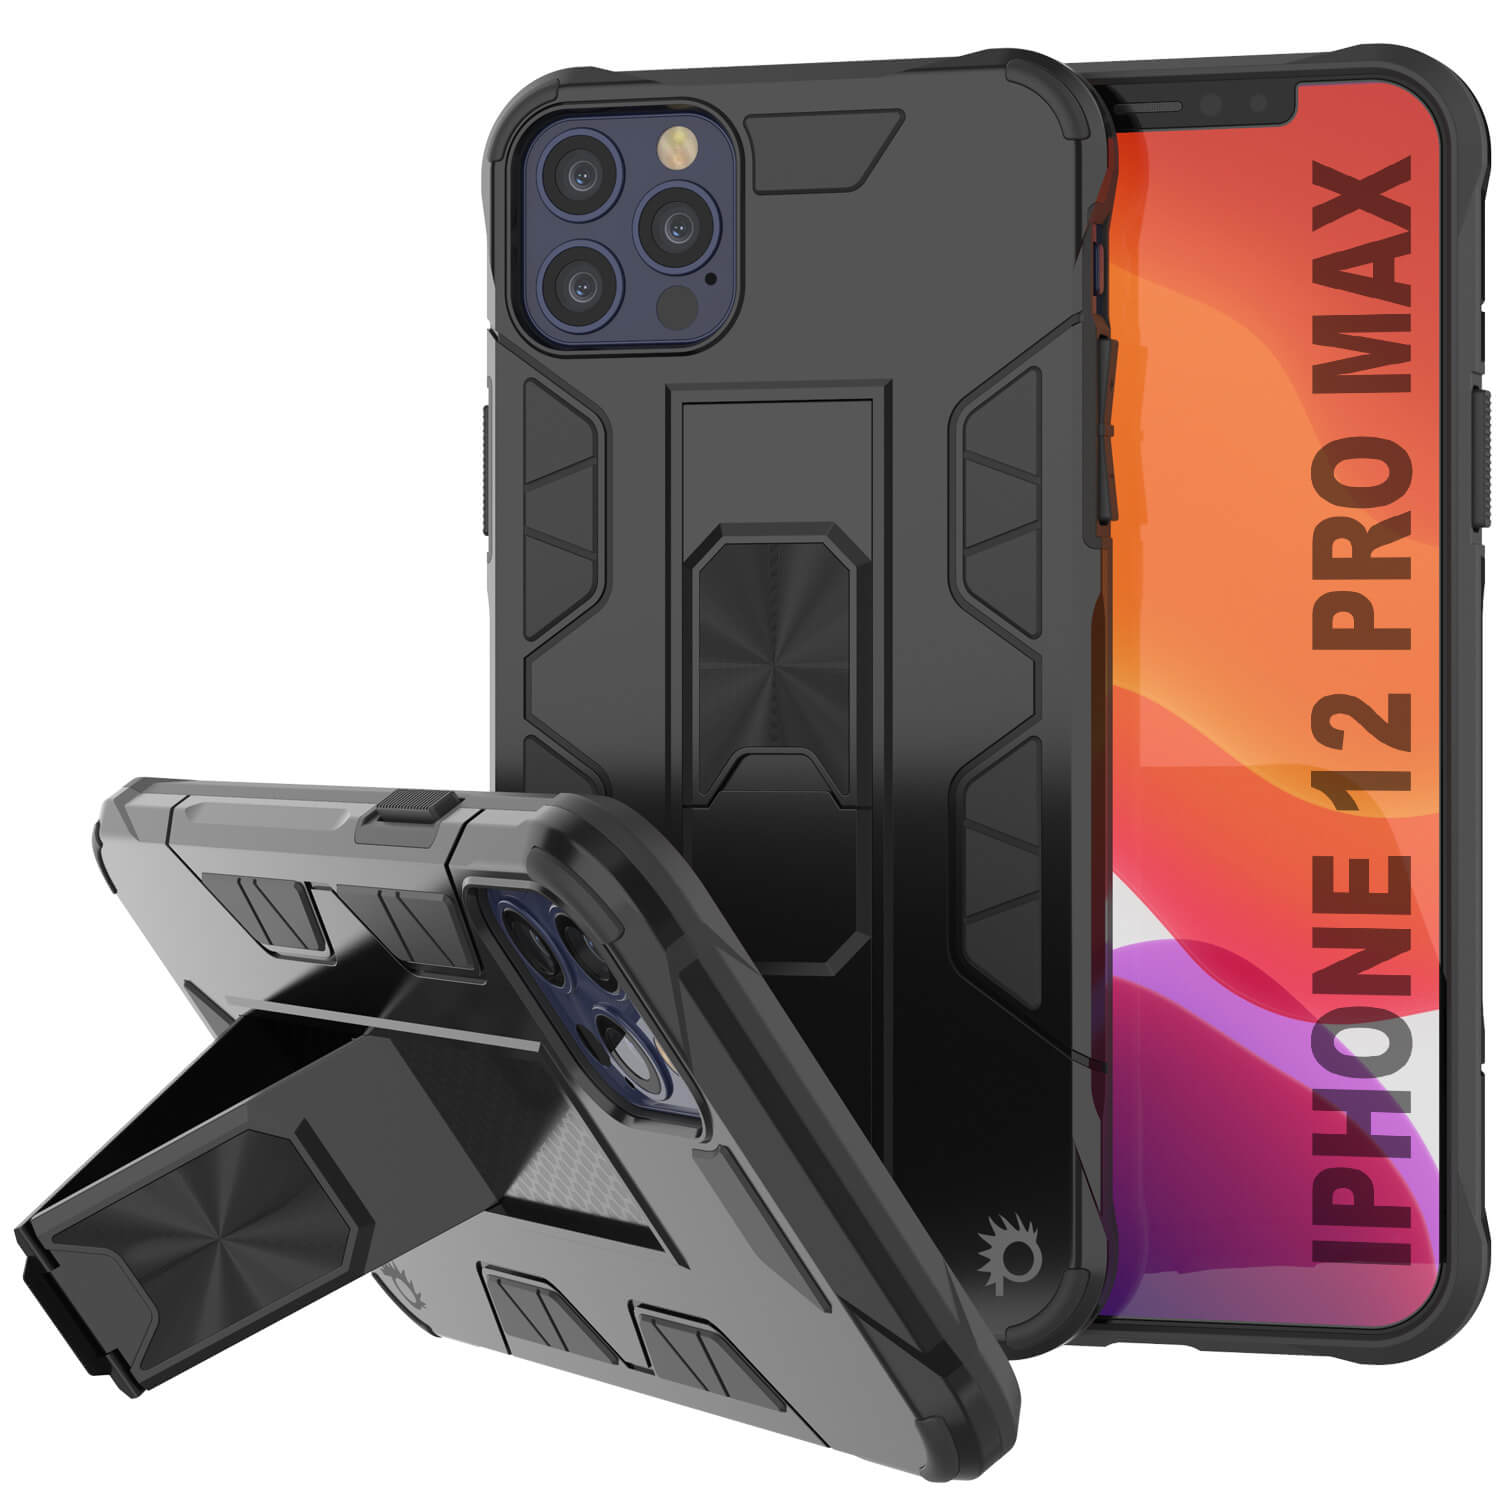 Punkcase Iphone 12 Pro Max Military Case With Kickstand